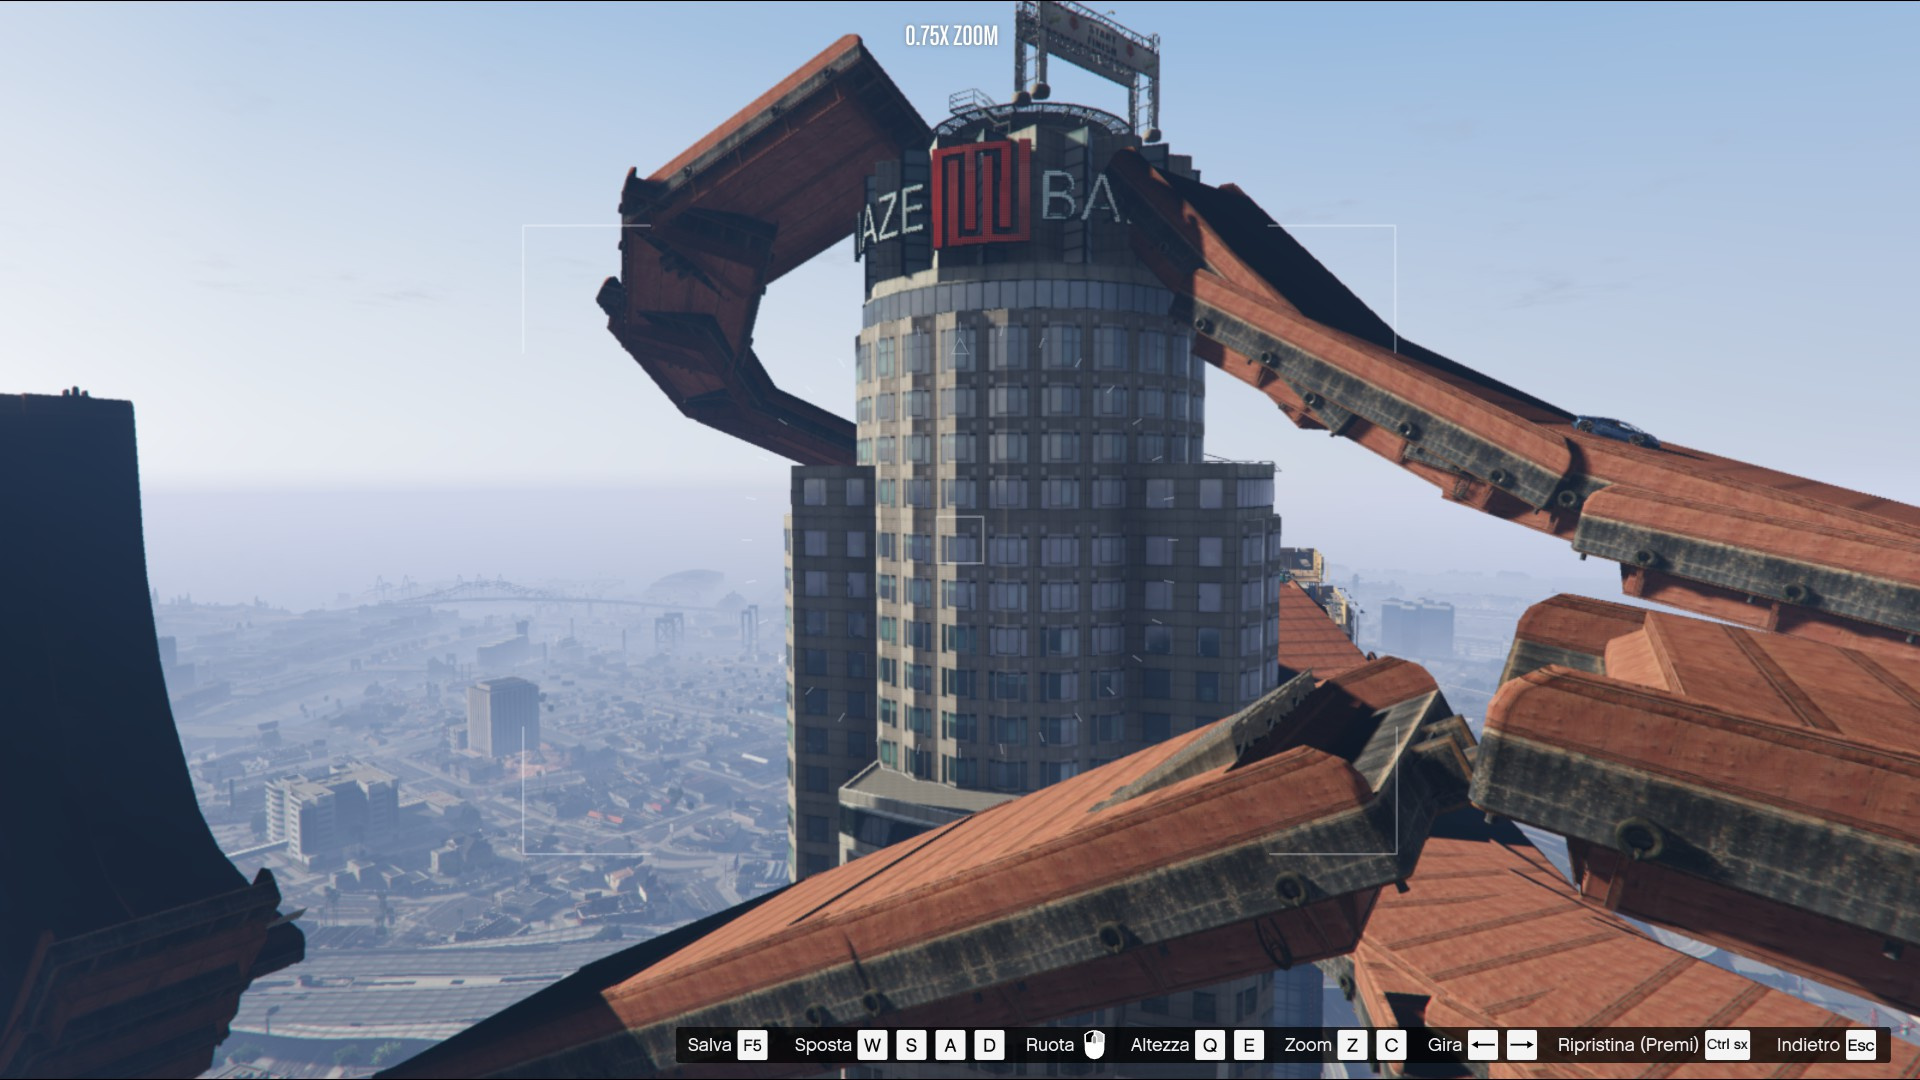 Get to the maze tower gta 5 фото 86